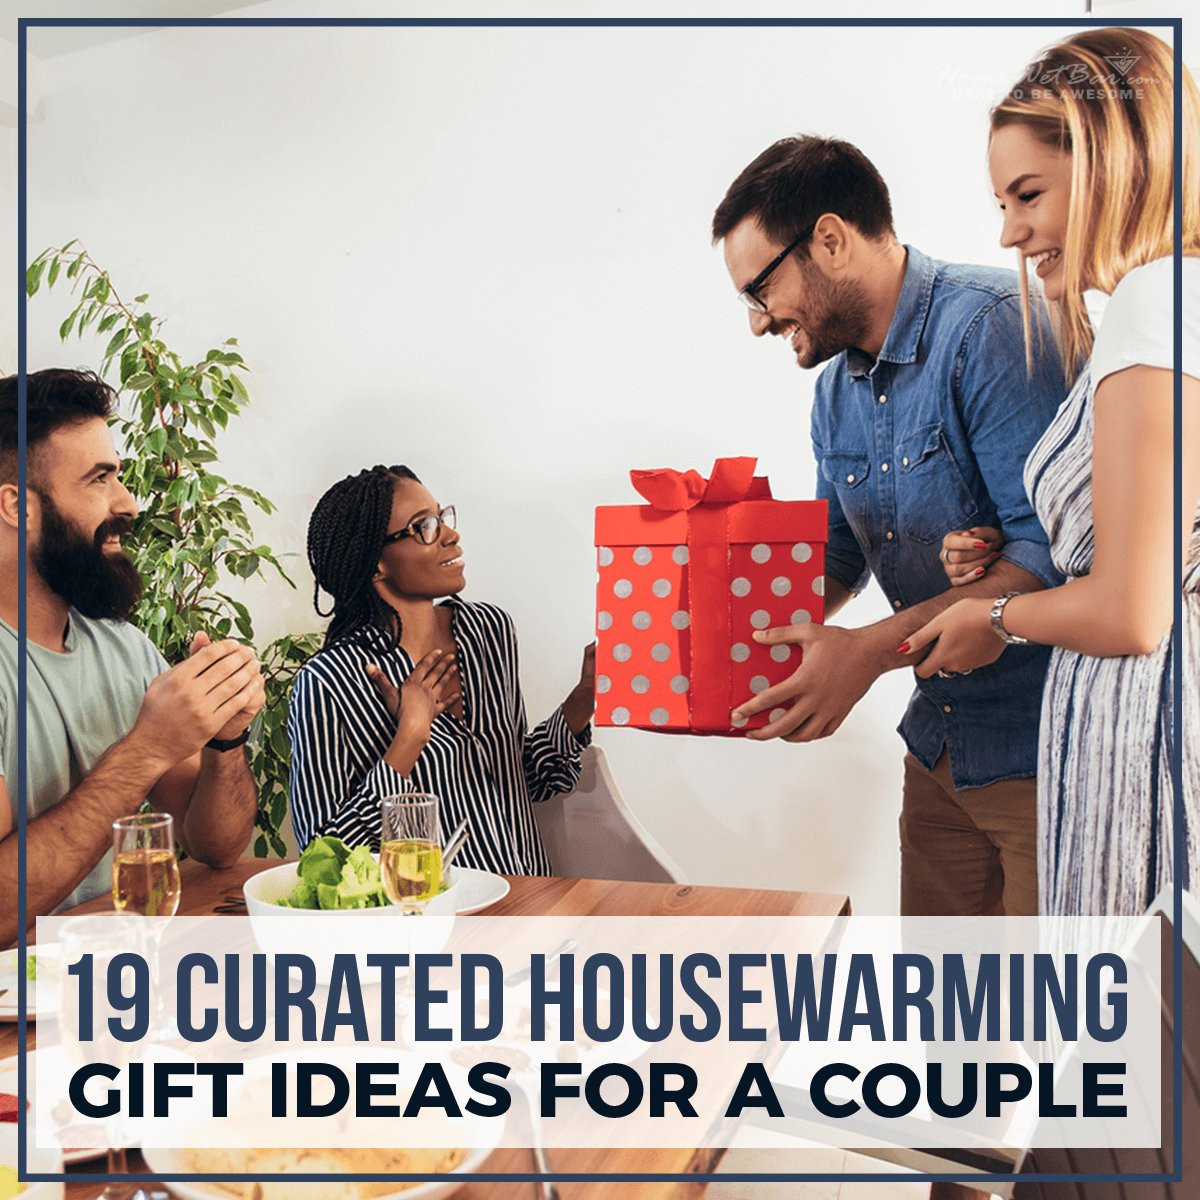 Gift Ideas For A Couple
 19 Curated Housewarming Gift Ideas for A Couple